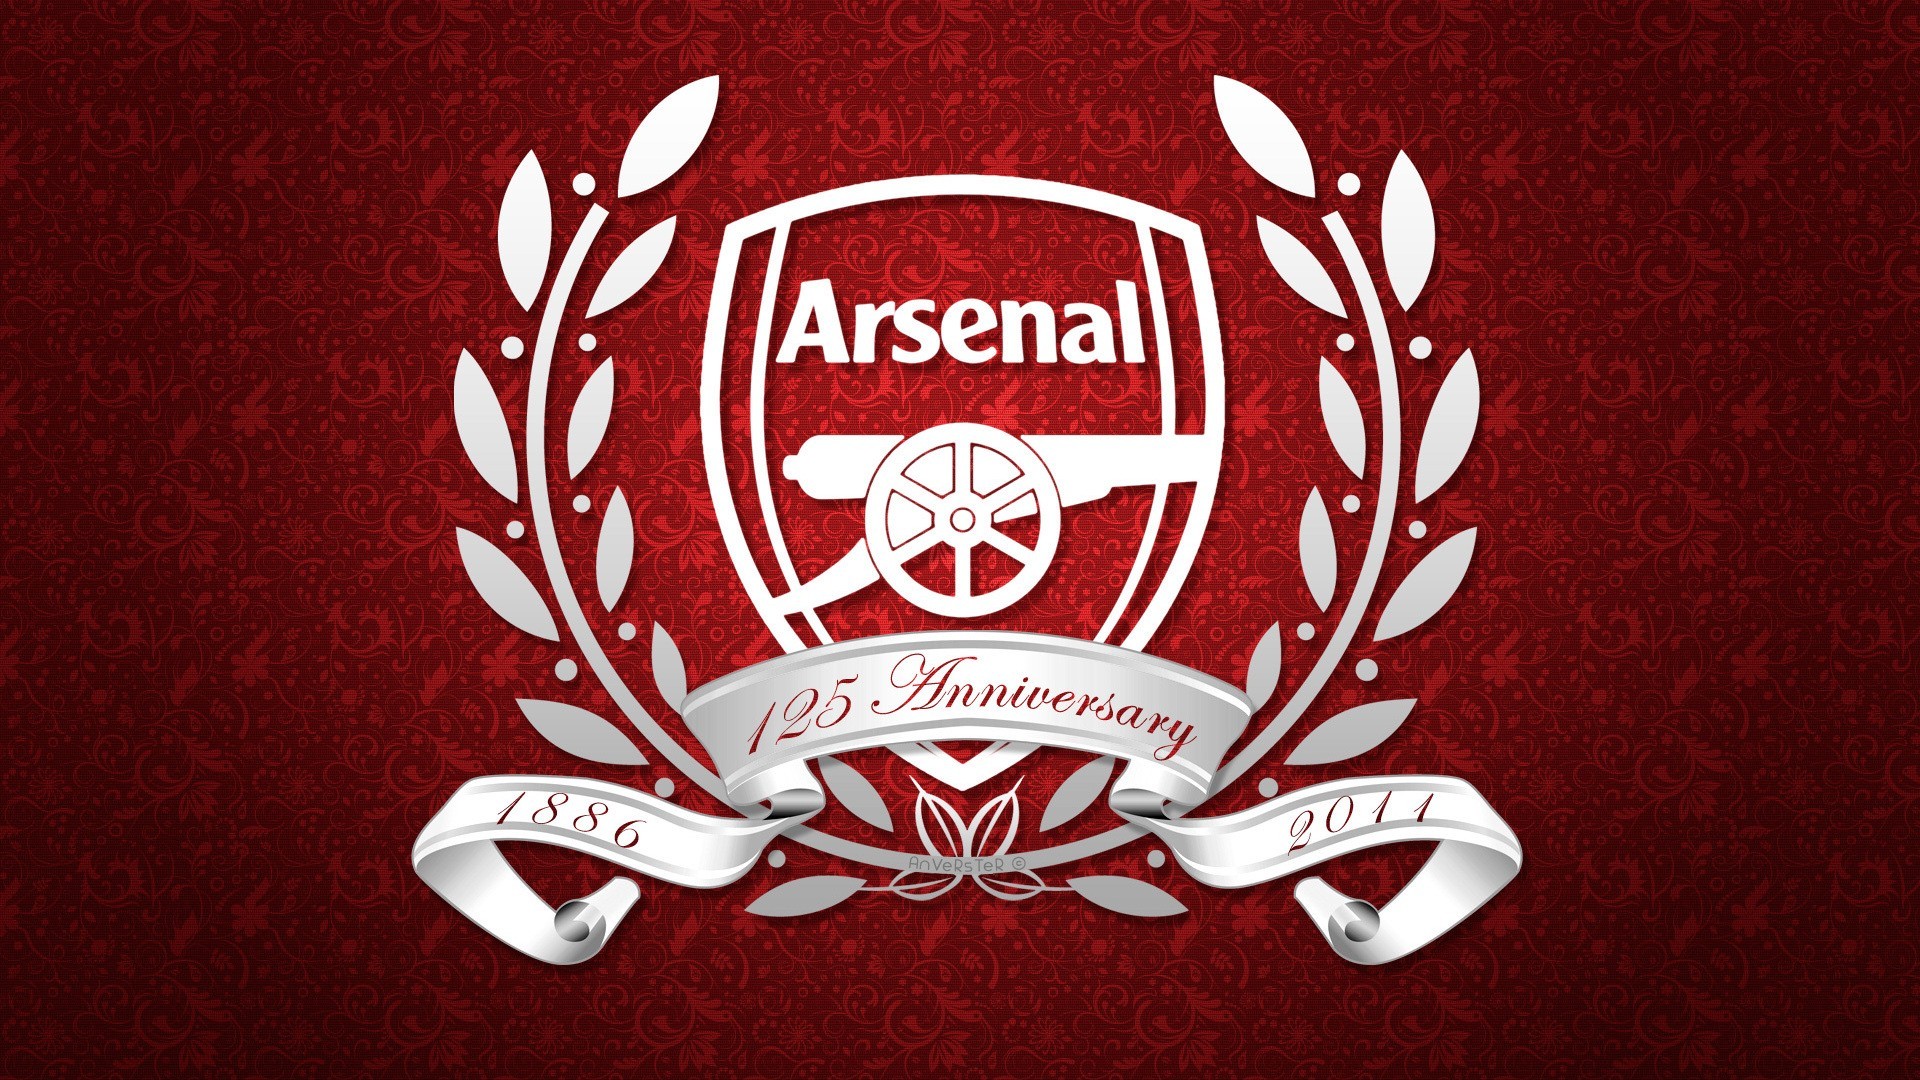 General 1920x1080 Arsenal FC logo soccer soccer clubs red background 1886 (Year) 2011 (Year) sport British Premier League